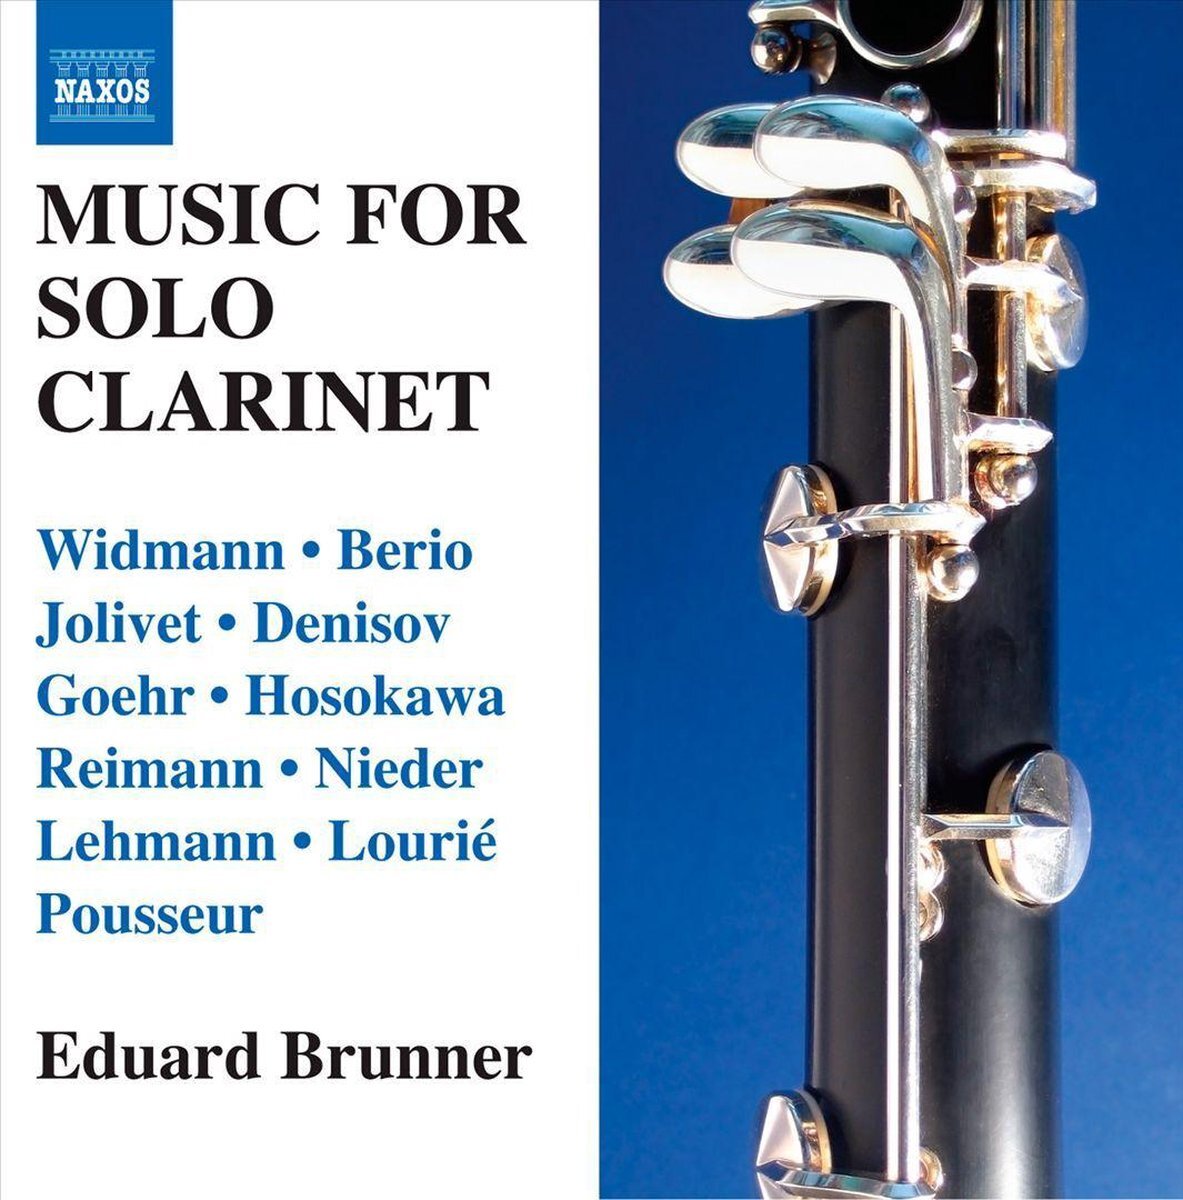 OUTHERE Music For Solo Clarinet